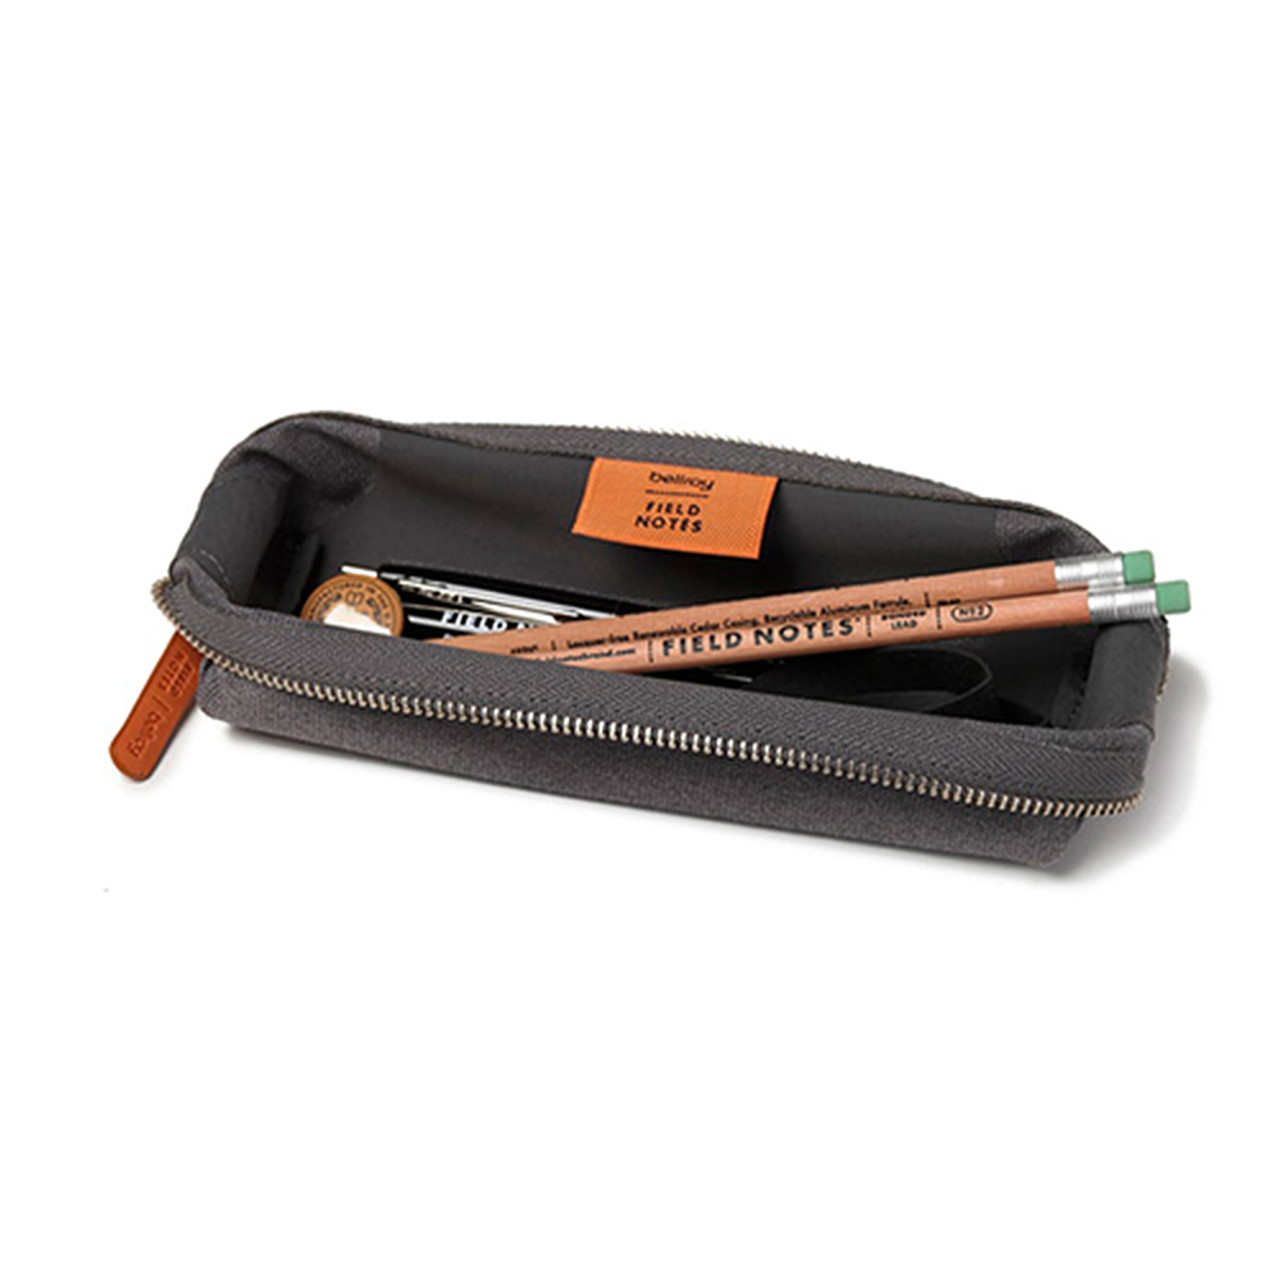 Field Notes Zippered Pencil Case